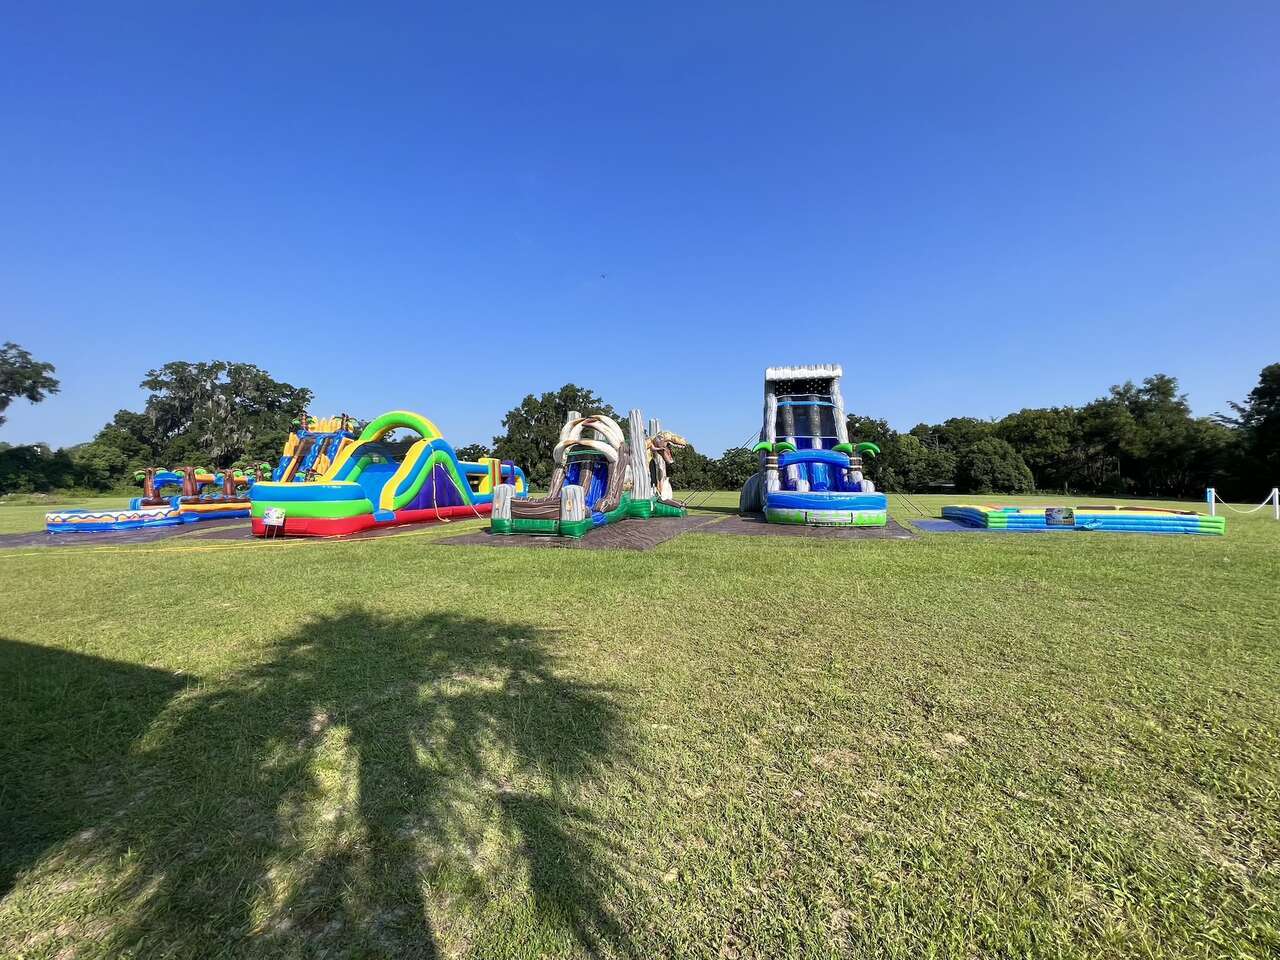 An expansive outdoor setup of colorful inflatable bounce houses and water slides by Rebound Party Rentals in a green park in Ocala, FL. The scene includes a tropical-themed slide, a multi-colored castle bounce house, and a large blue water slide under a clear blue sky, perfect for summer festivities and family fun days.